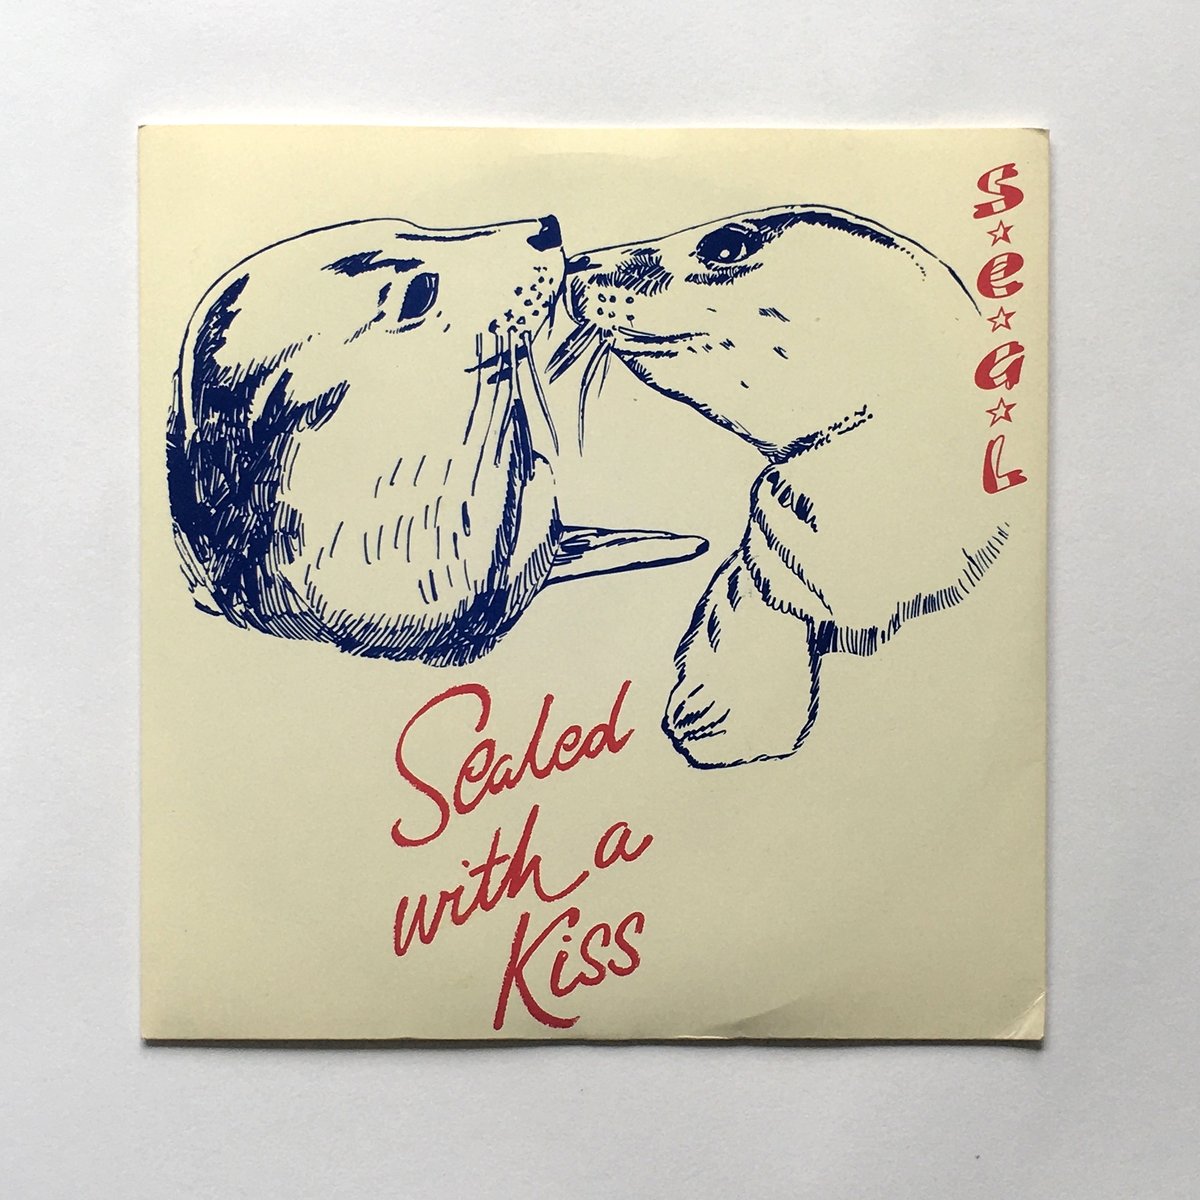 Sheep Bowl - Sealed with a Kiss